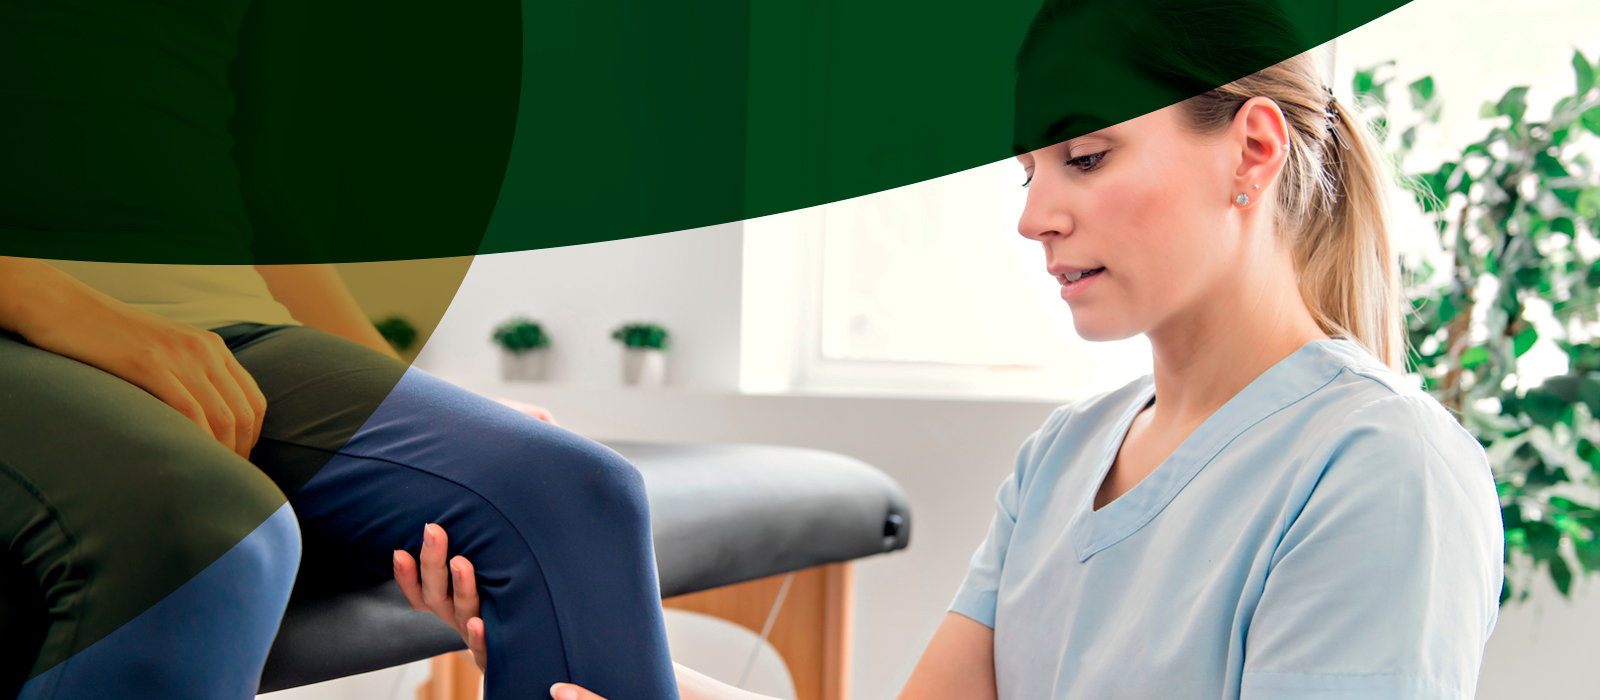 Medigold Health Physiotherapy, Counselling and Employee Wellbeing